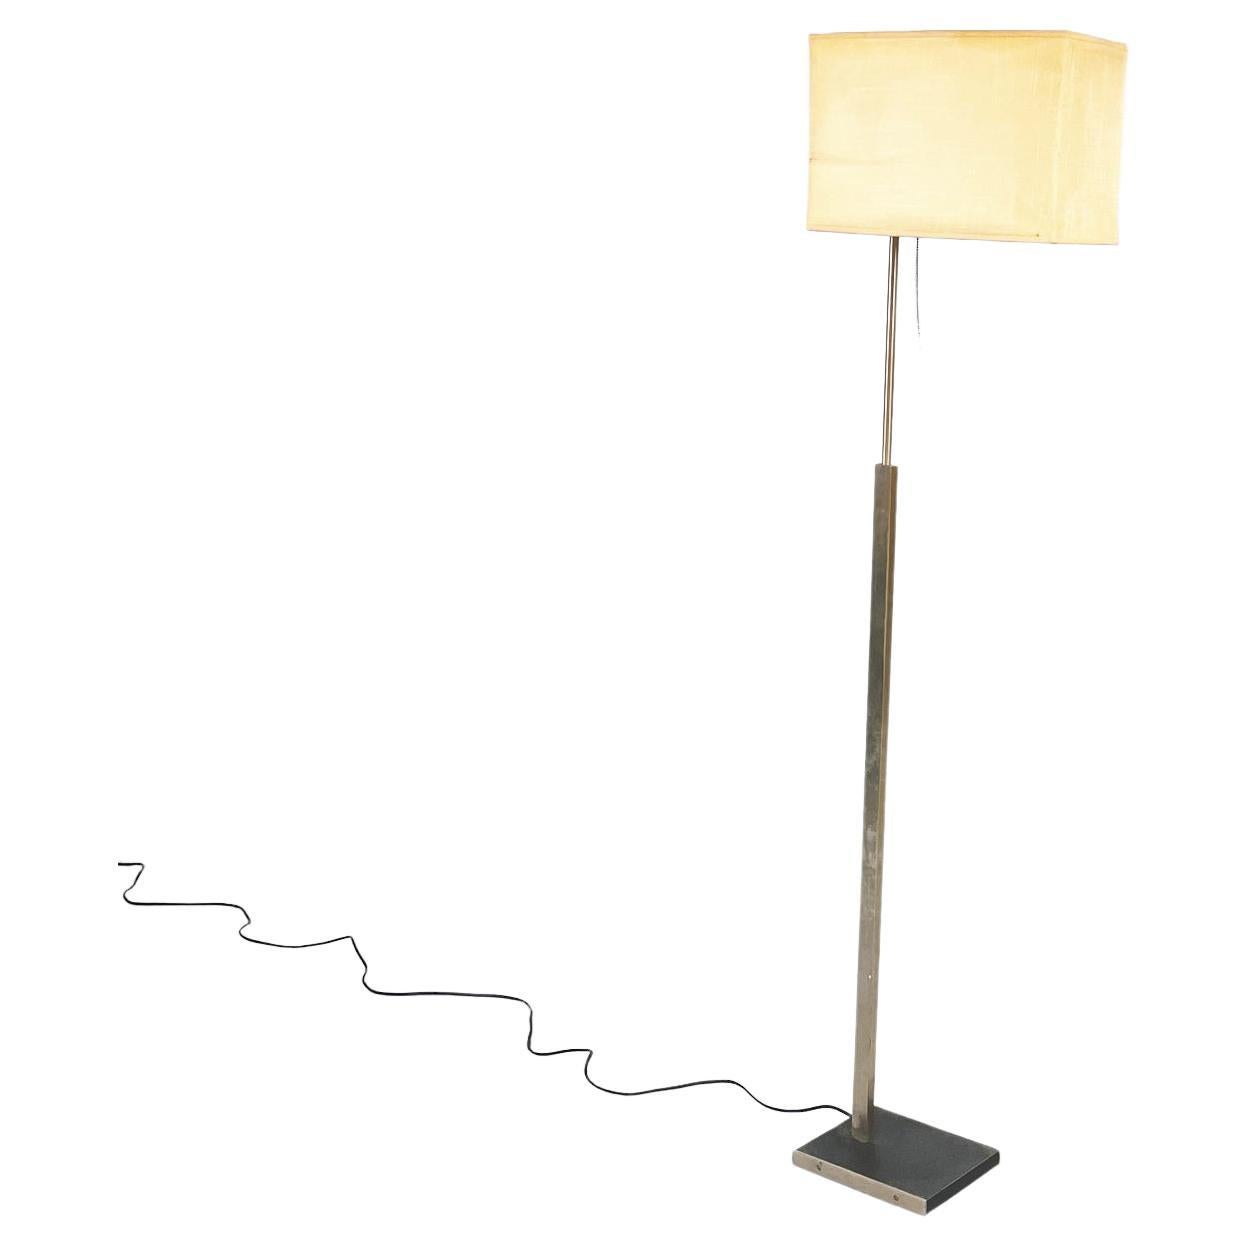 Italian Mid-Century Floor Lamp in Fabric, Leather and Brass by Stilnovo, 1970s For Sale